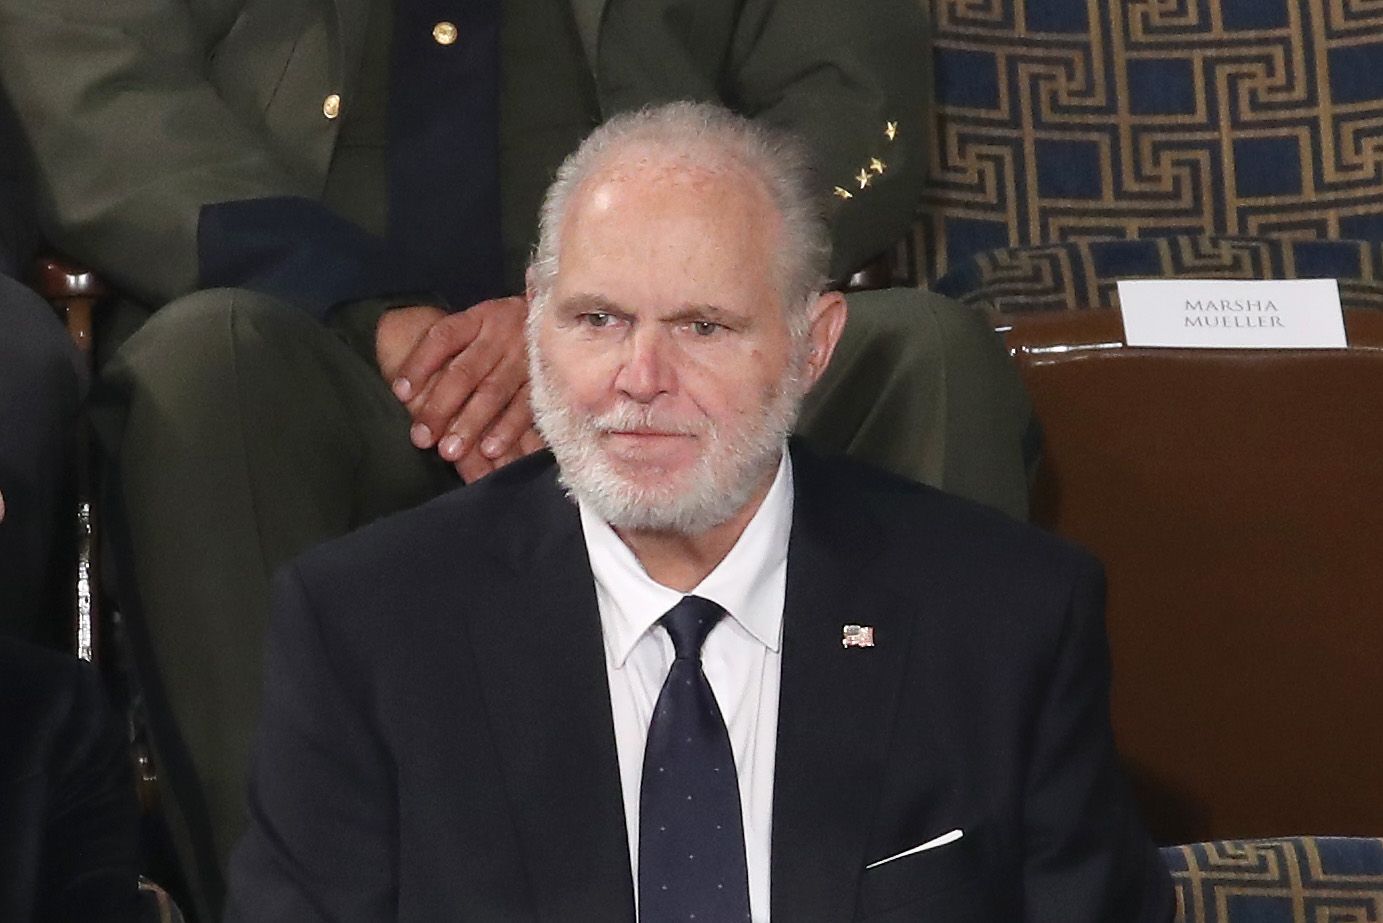 Rush Limbaugh at the chamber of the U.S. House of Representatives on February 04, 2020 in Washington, DC. | Source: Getty Images